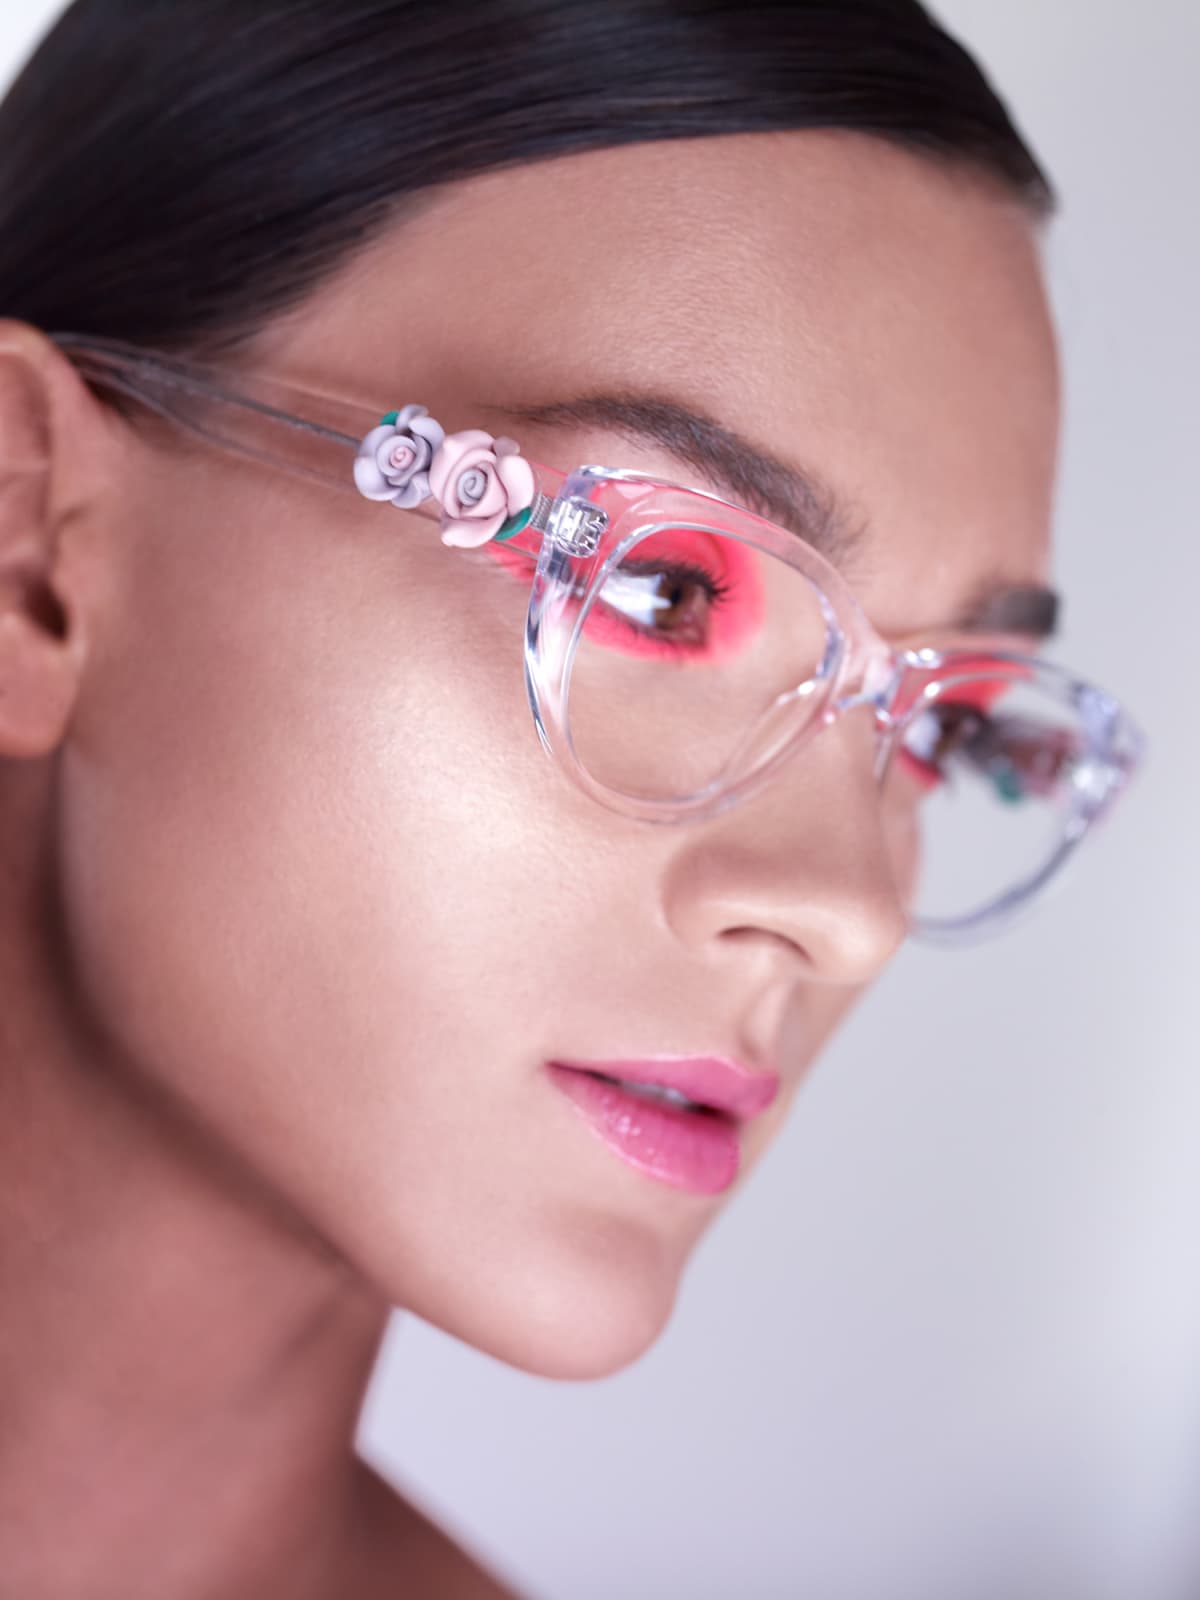 Close up side view of woman wearing clear glasses and pink eye makeup